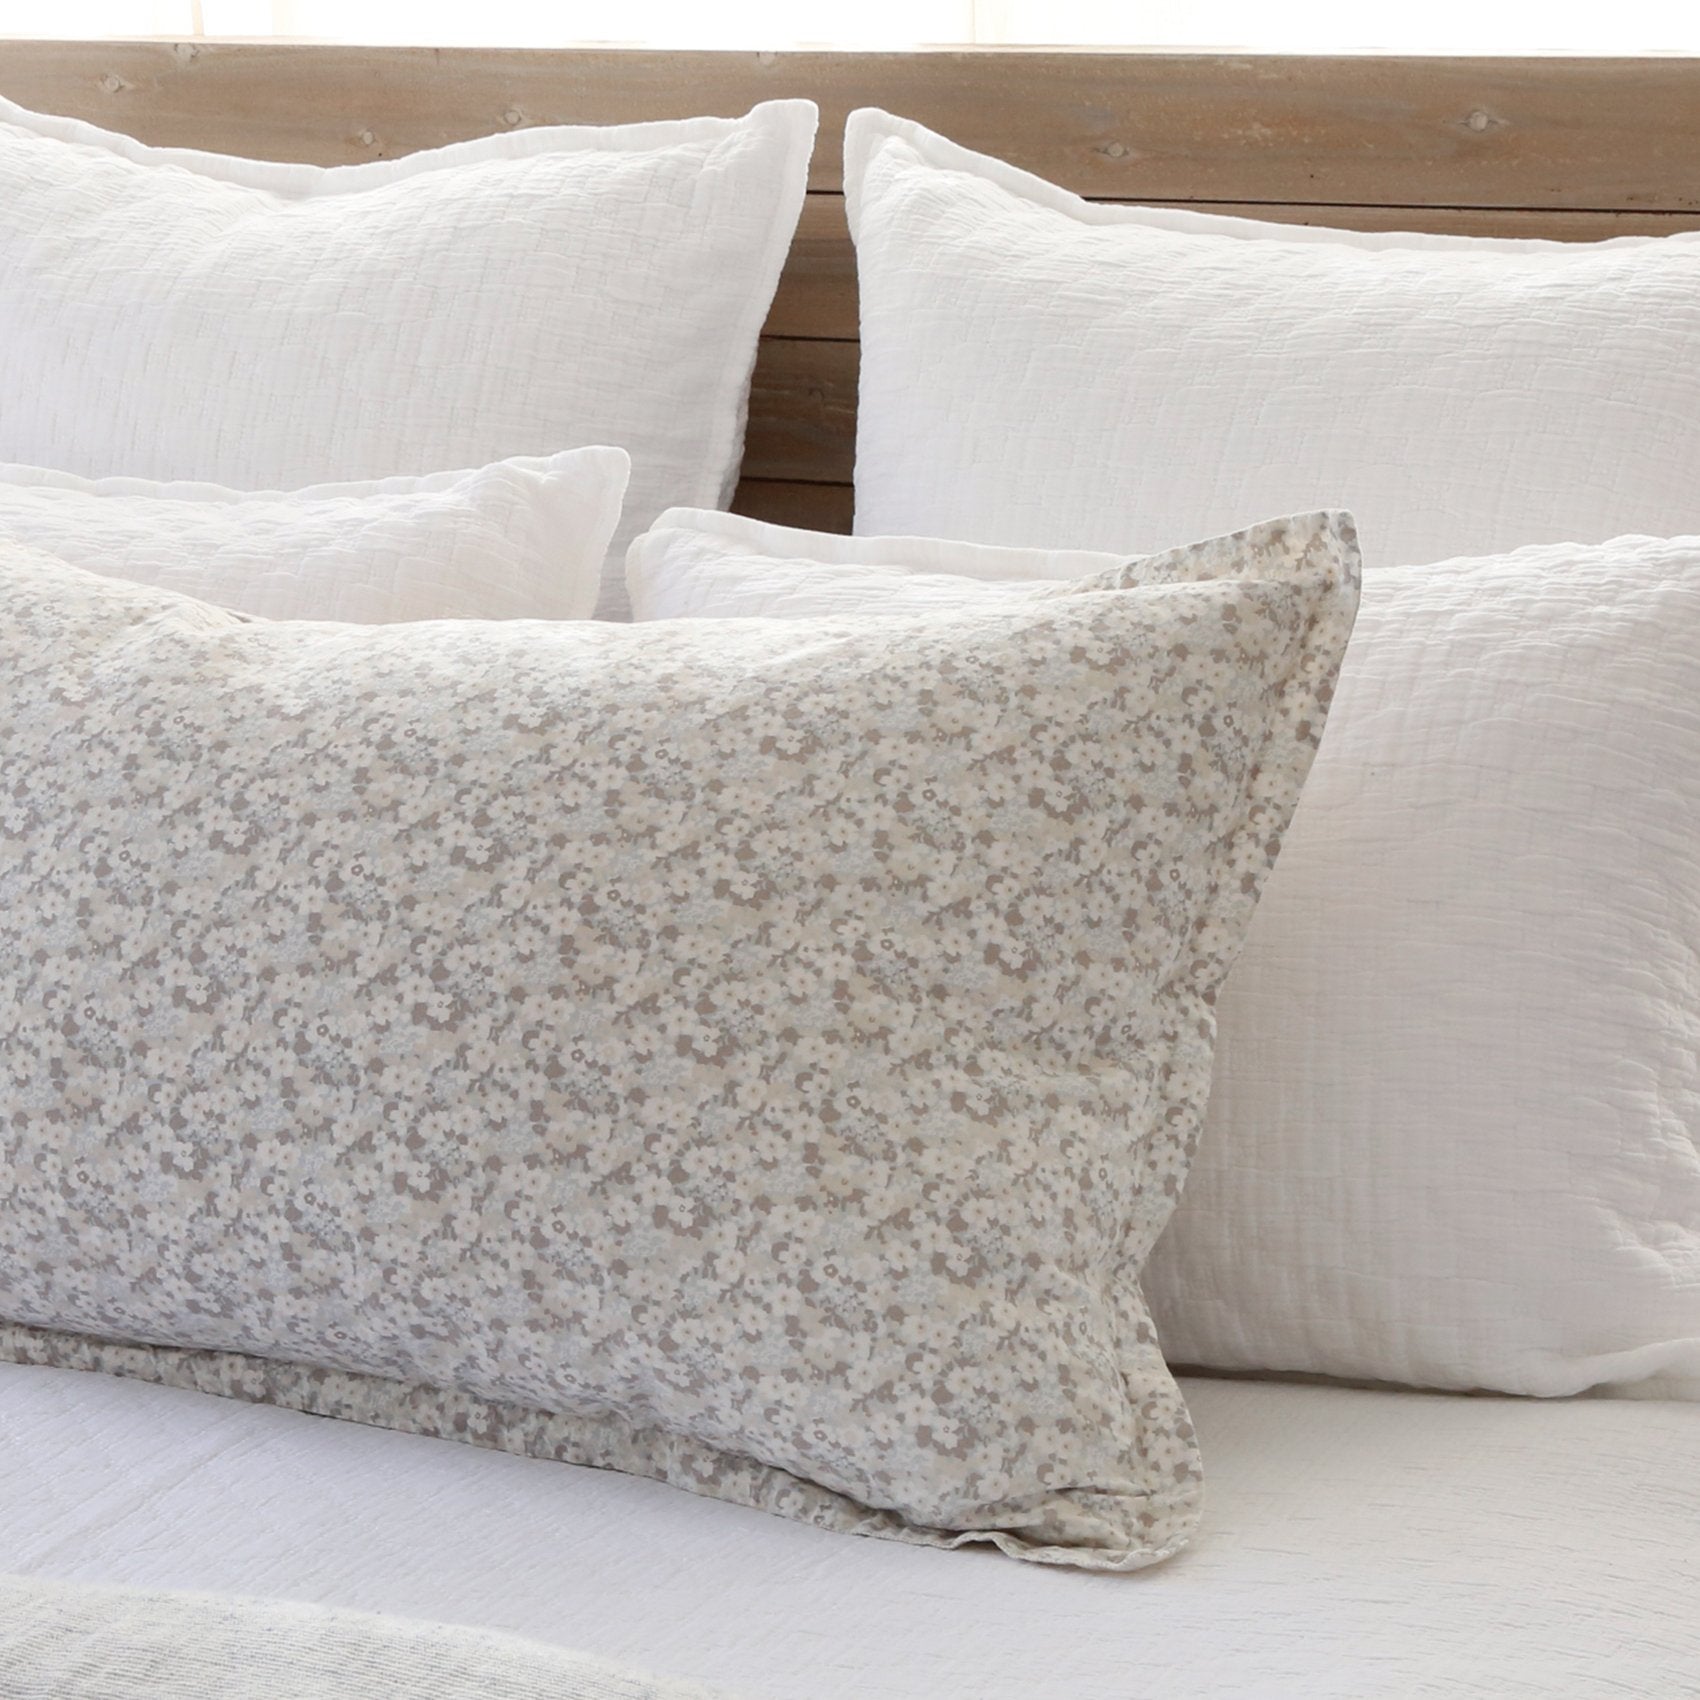 Pom Pom at Home June Big Pillow with Insert Ocean/Grey